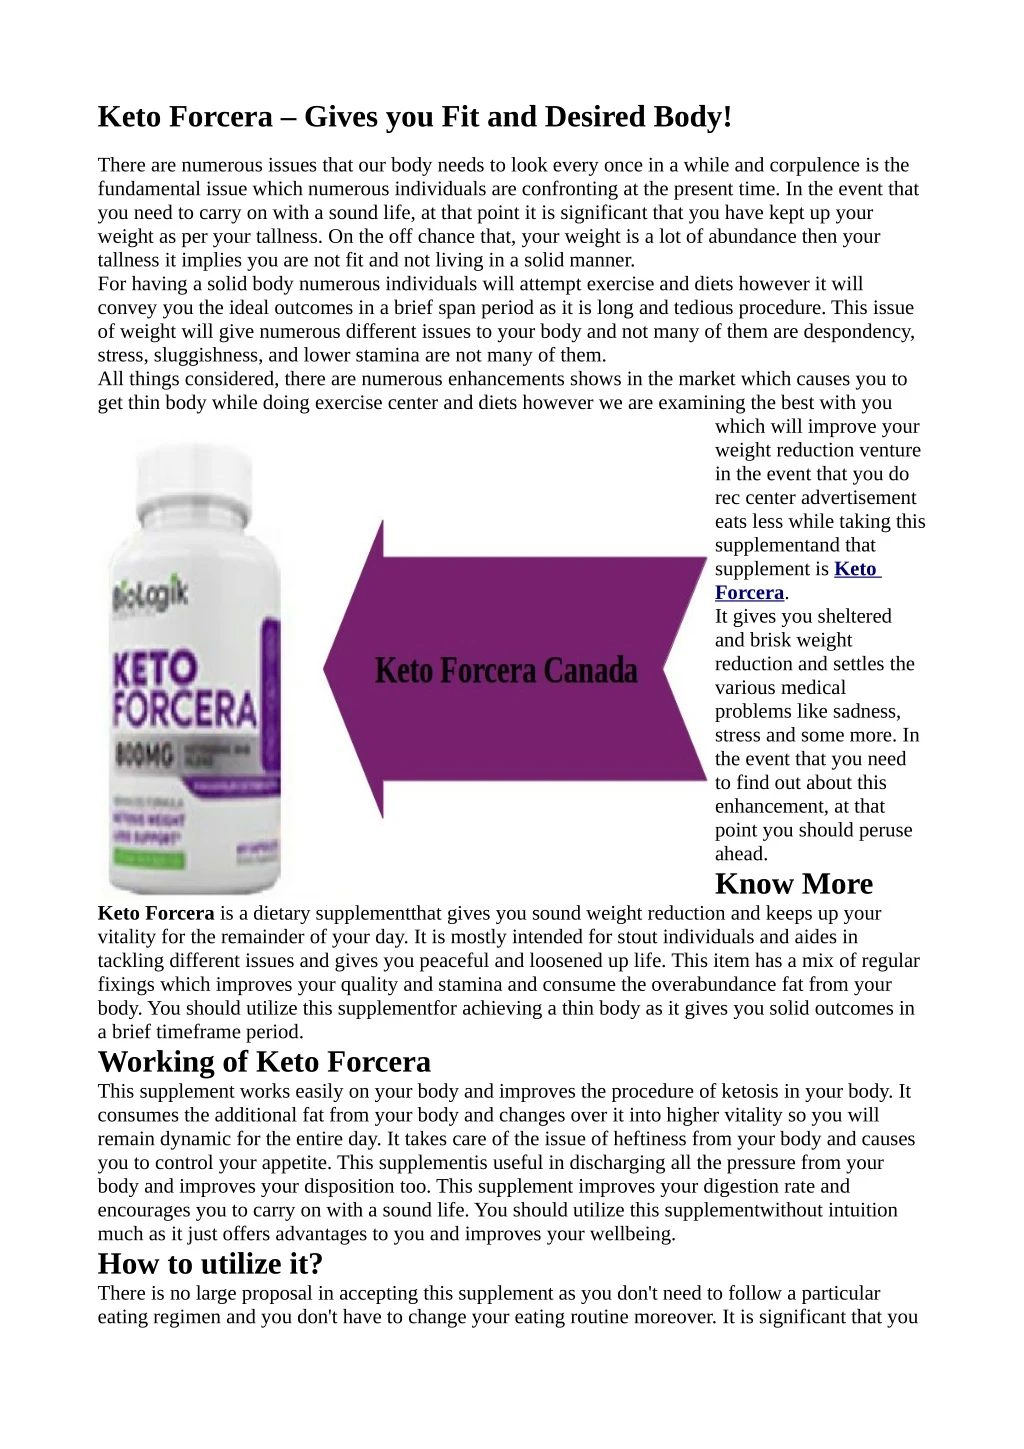 keto forcera gives you fit and desired body